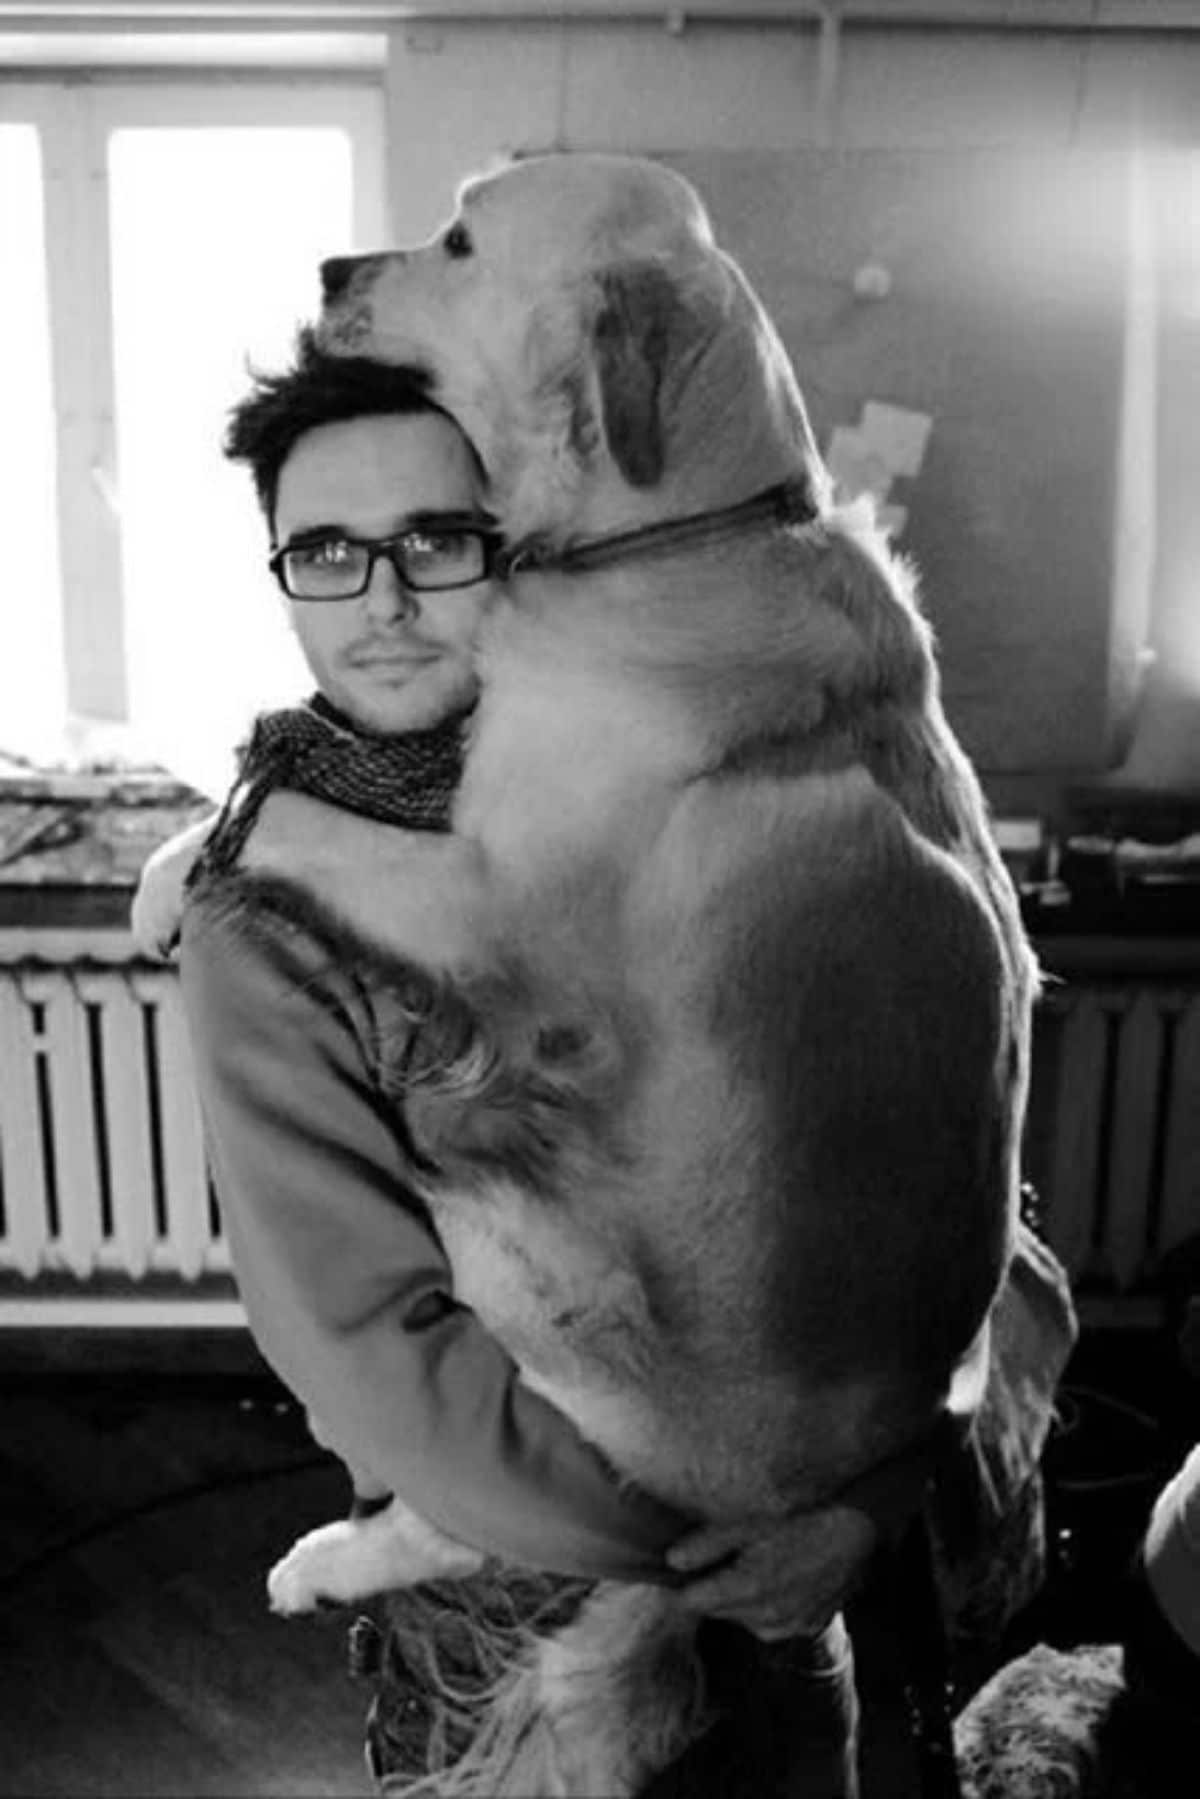 black and white photo of a large dog being carried by a person